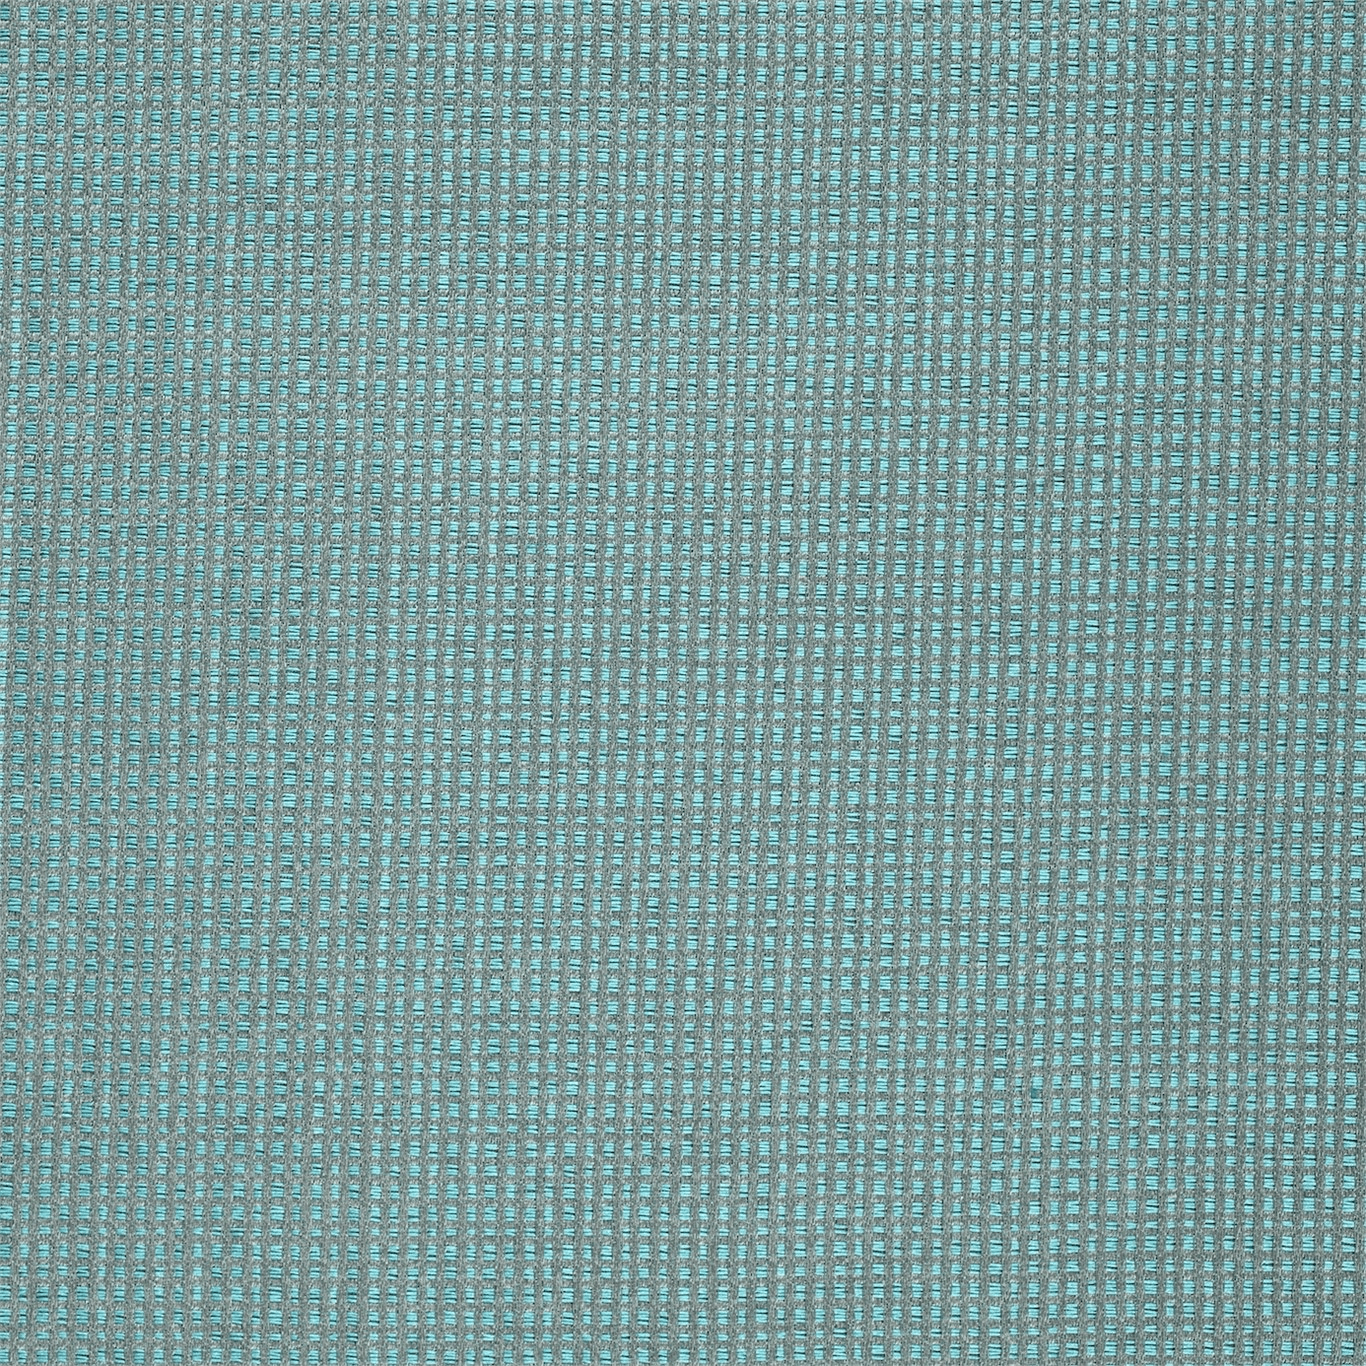 Accents Fabric - Turquoise - By Harlequin - 131318